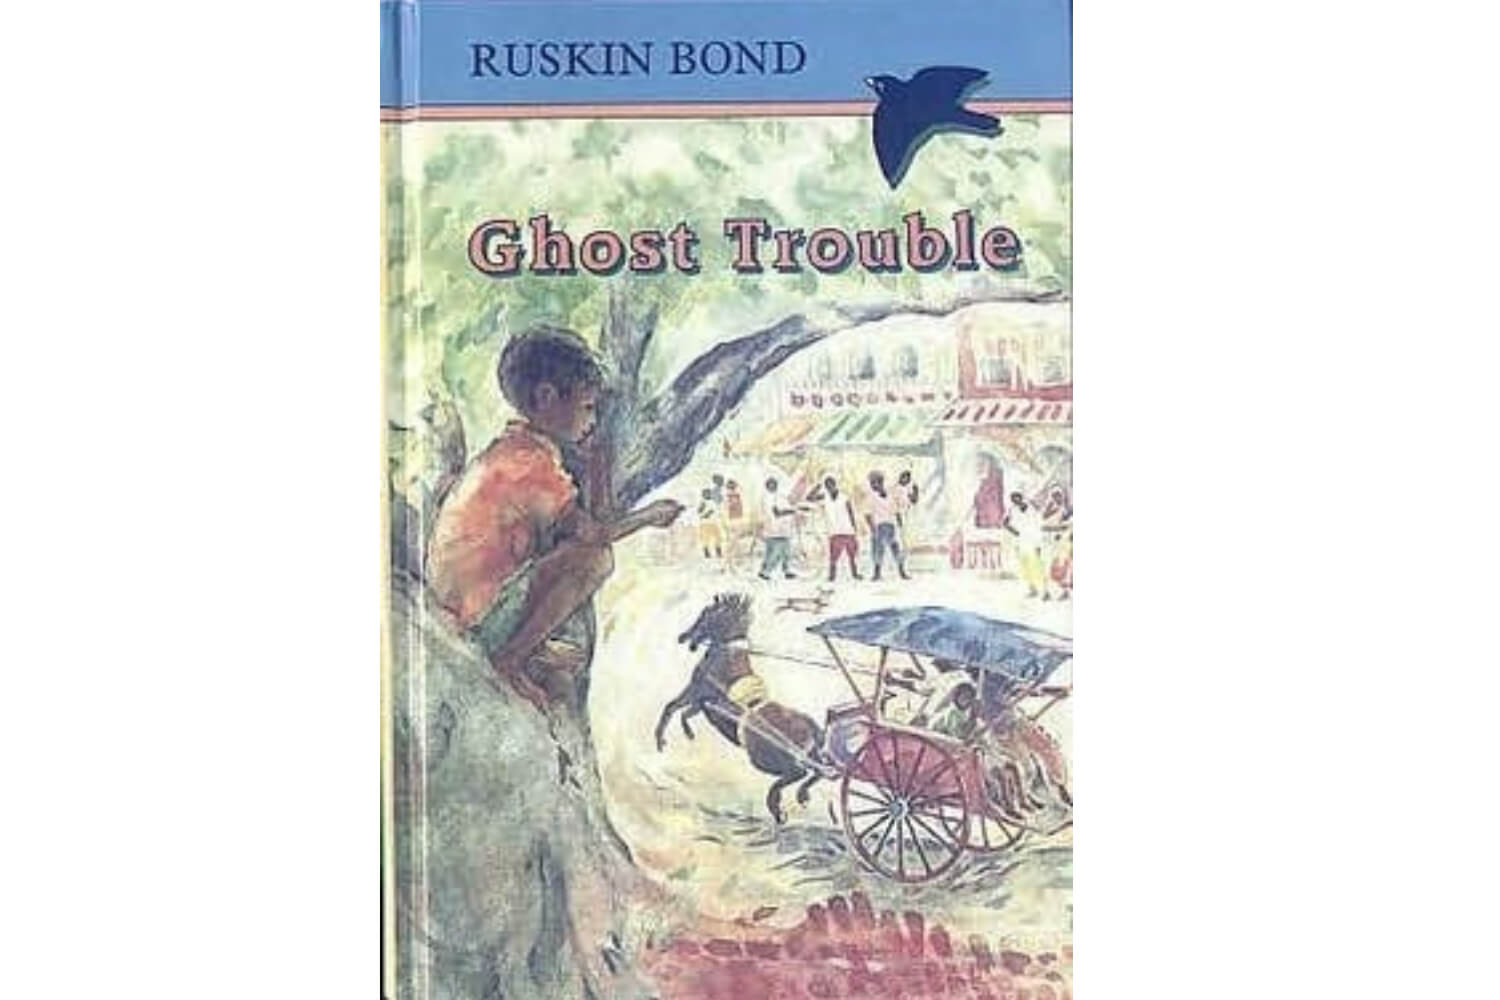 ghost trouble Stories By Ruskin Bond For Children